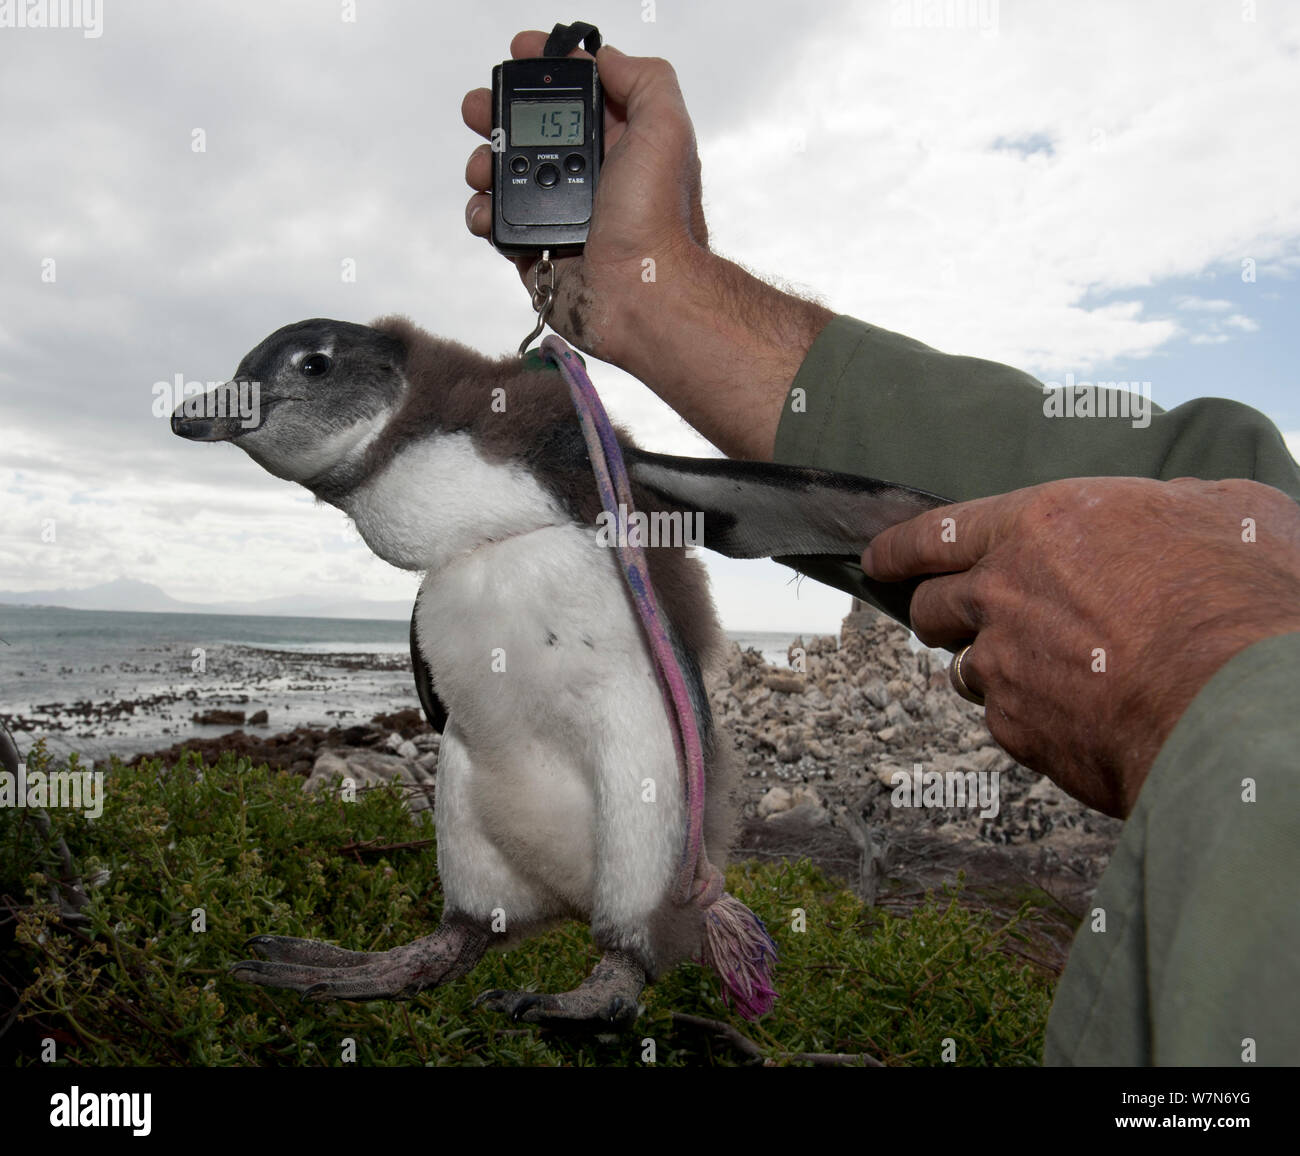 Black footed penguin (Spheniscus demersus) chicks in poor condition are rescued from the colony and sent for hand rearing and rehabilitation at the Southern African Foundation for the Conservation of Coastal Birds (SANCCOB) Cape Town, South Africa. This Black footed penguin colony is Stony Point, Betty's Bay, South Africa. This chick is being weighed by the warden, December 2011 Stock Photo